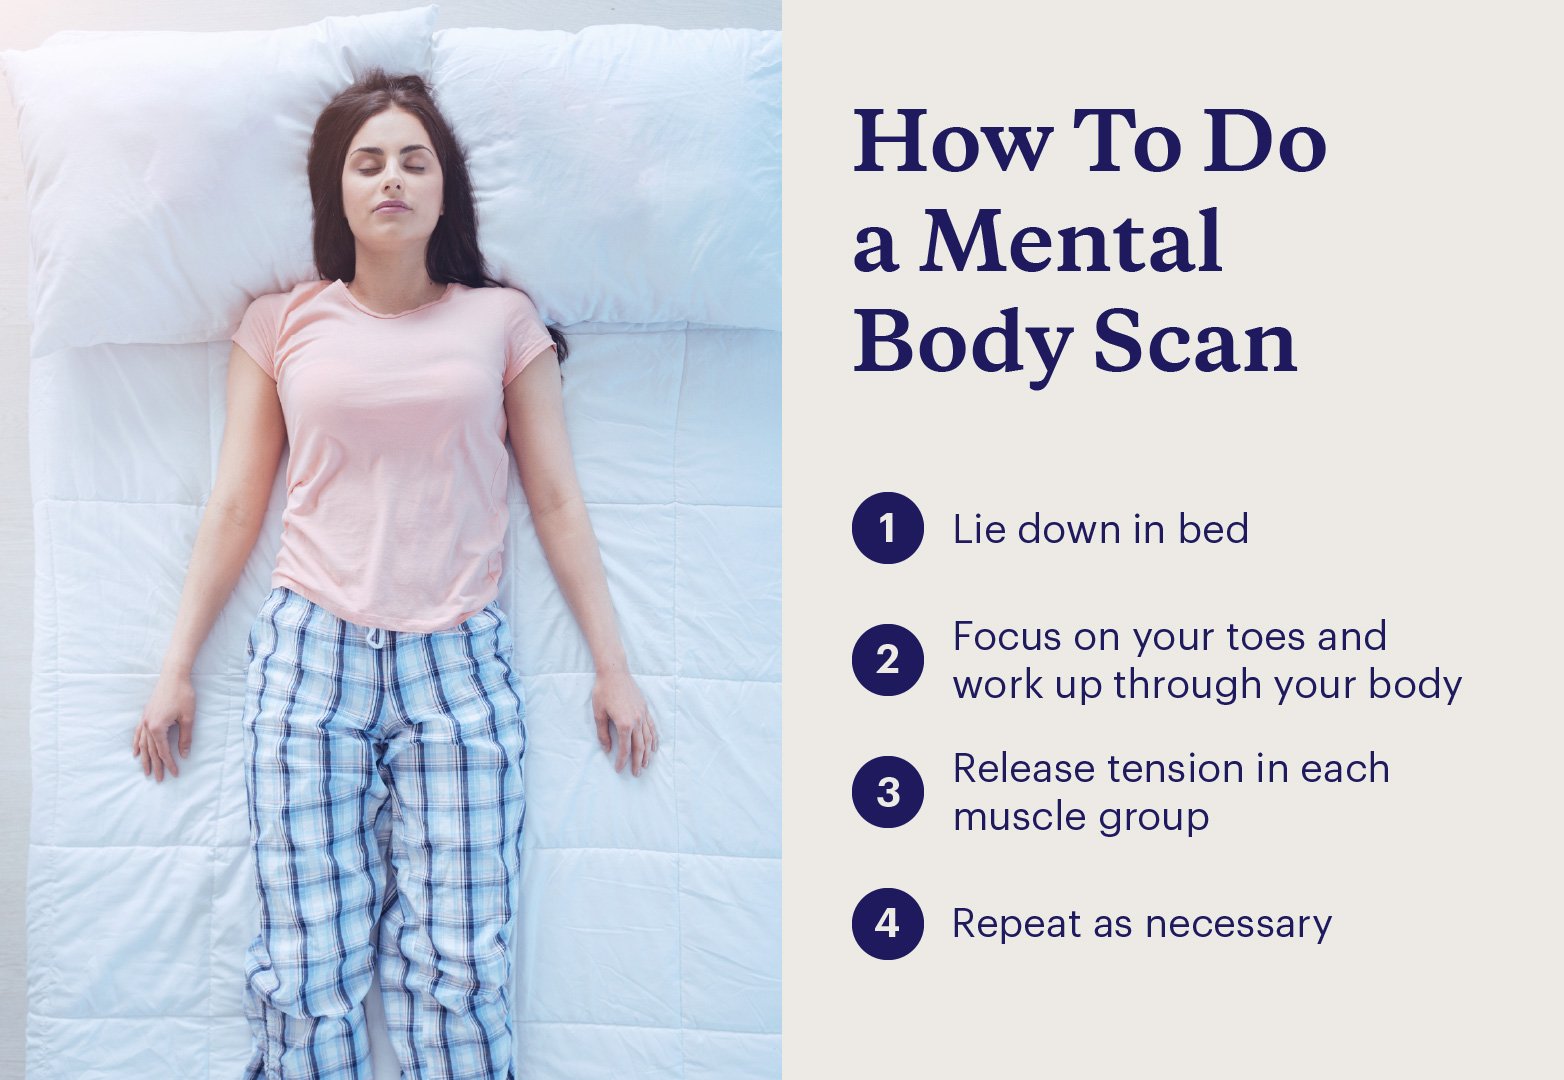 Conduct a mental body scan by lying down in bed and focusing on your toes, then work your way up through each muscle group.